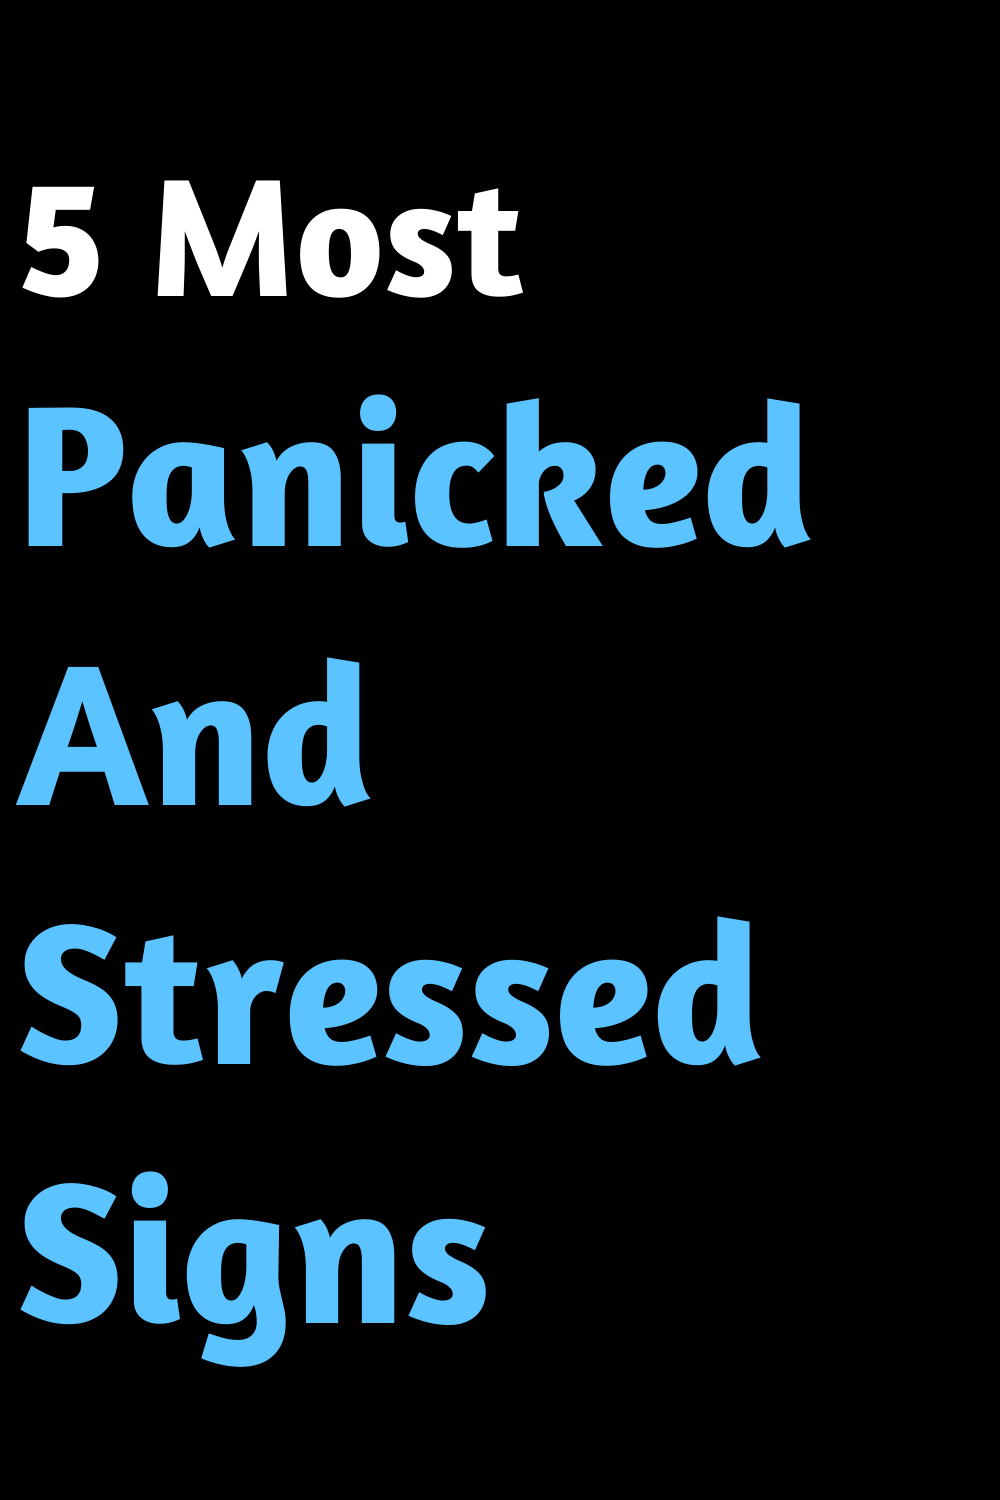 5 Most Panicked And Stressed Signs